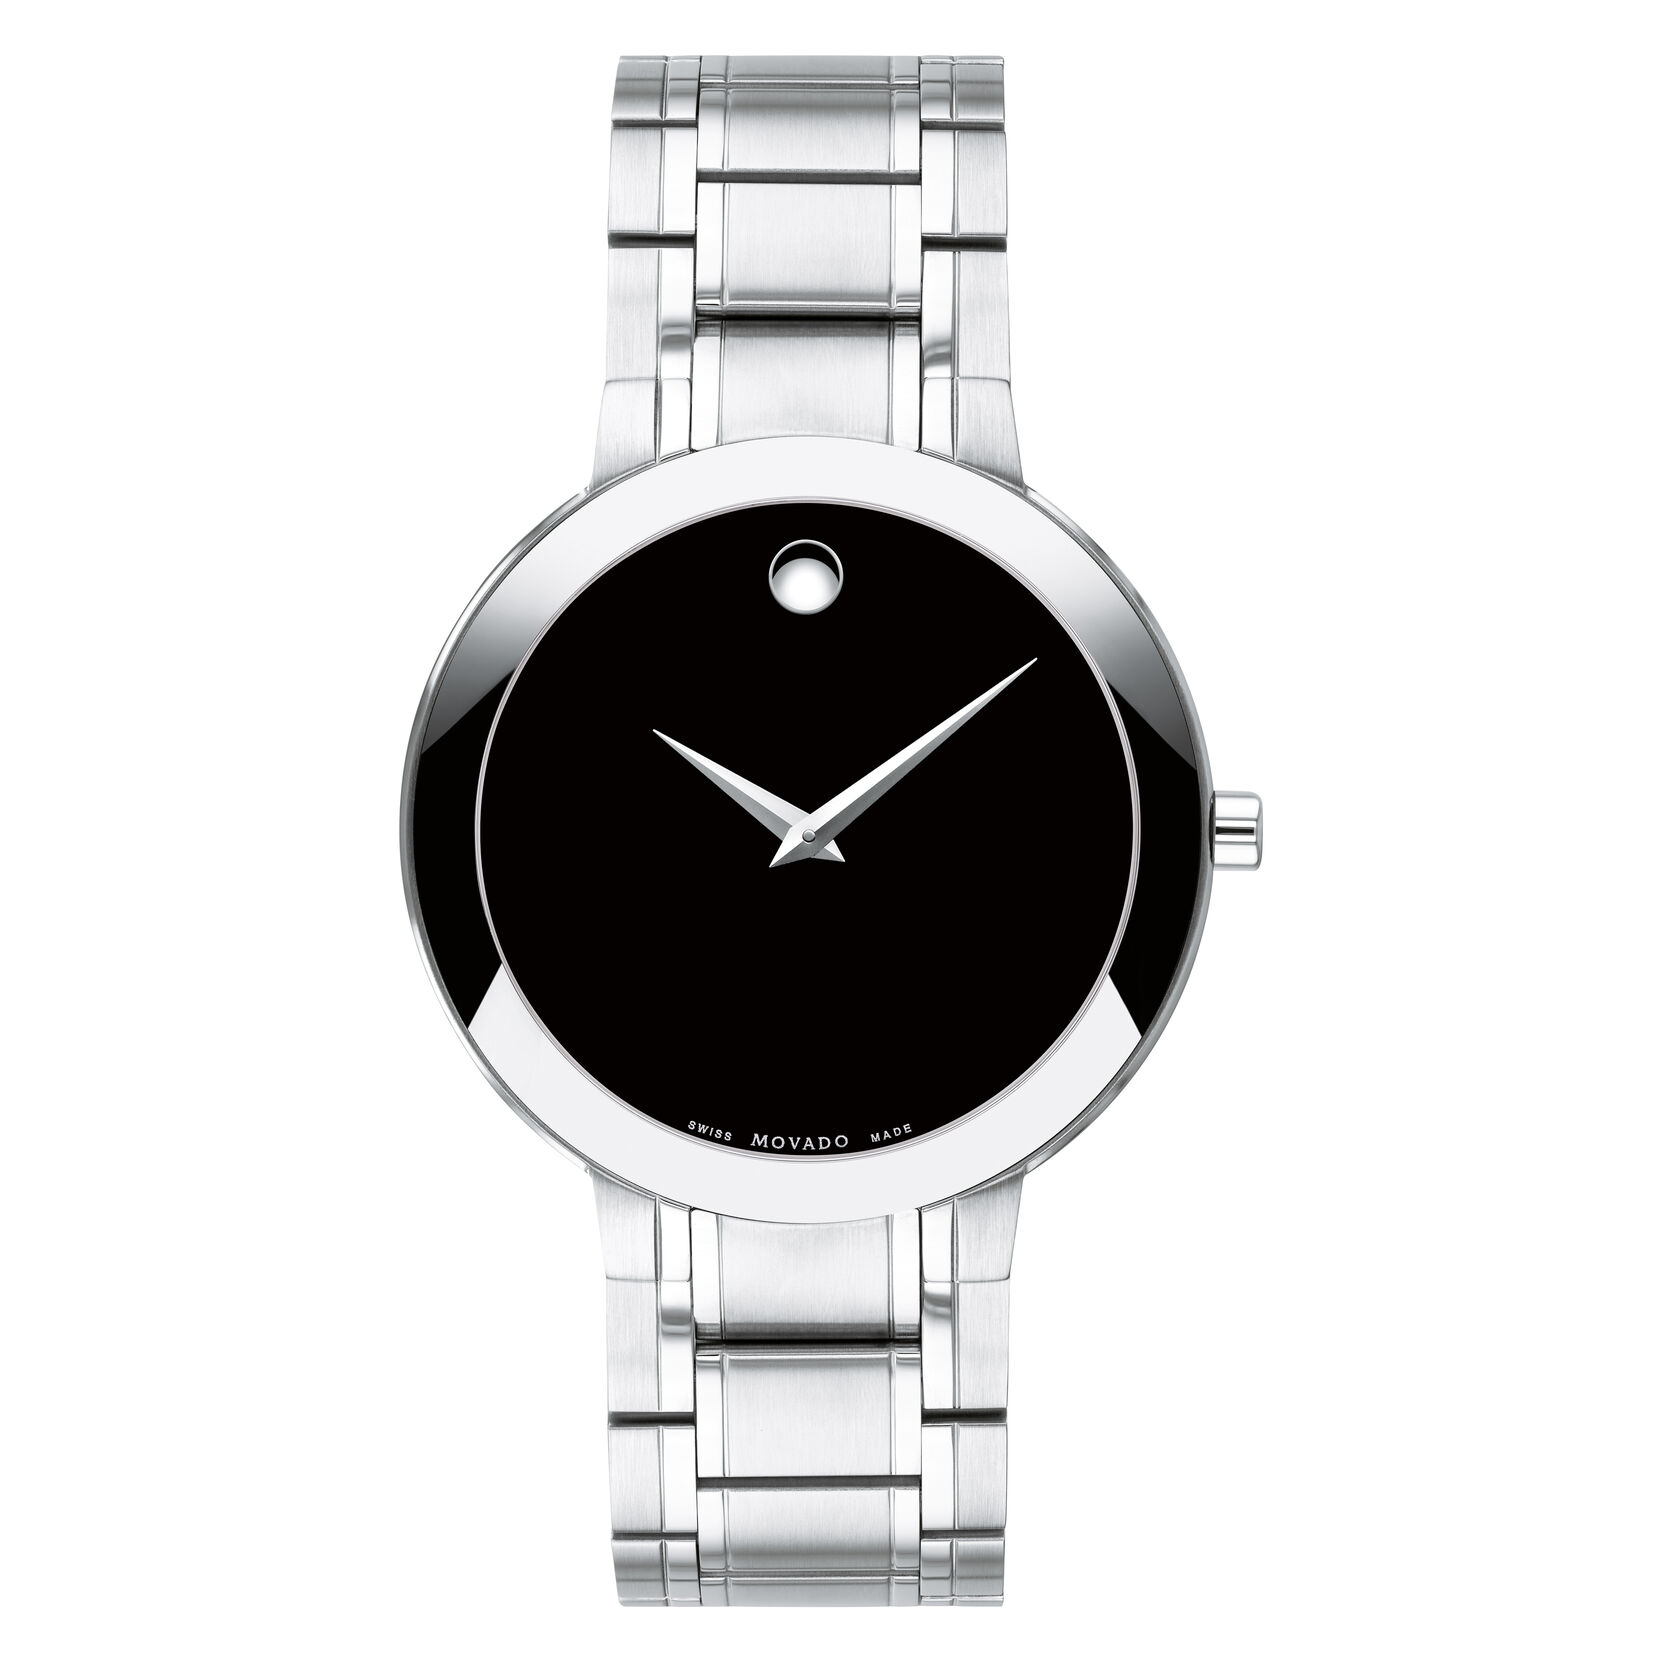 Stiri Company 40mm |Men\'s link Movado stainless Store Movado watch, steel bracelet and case |